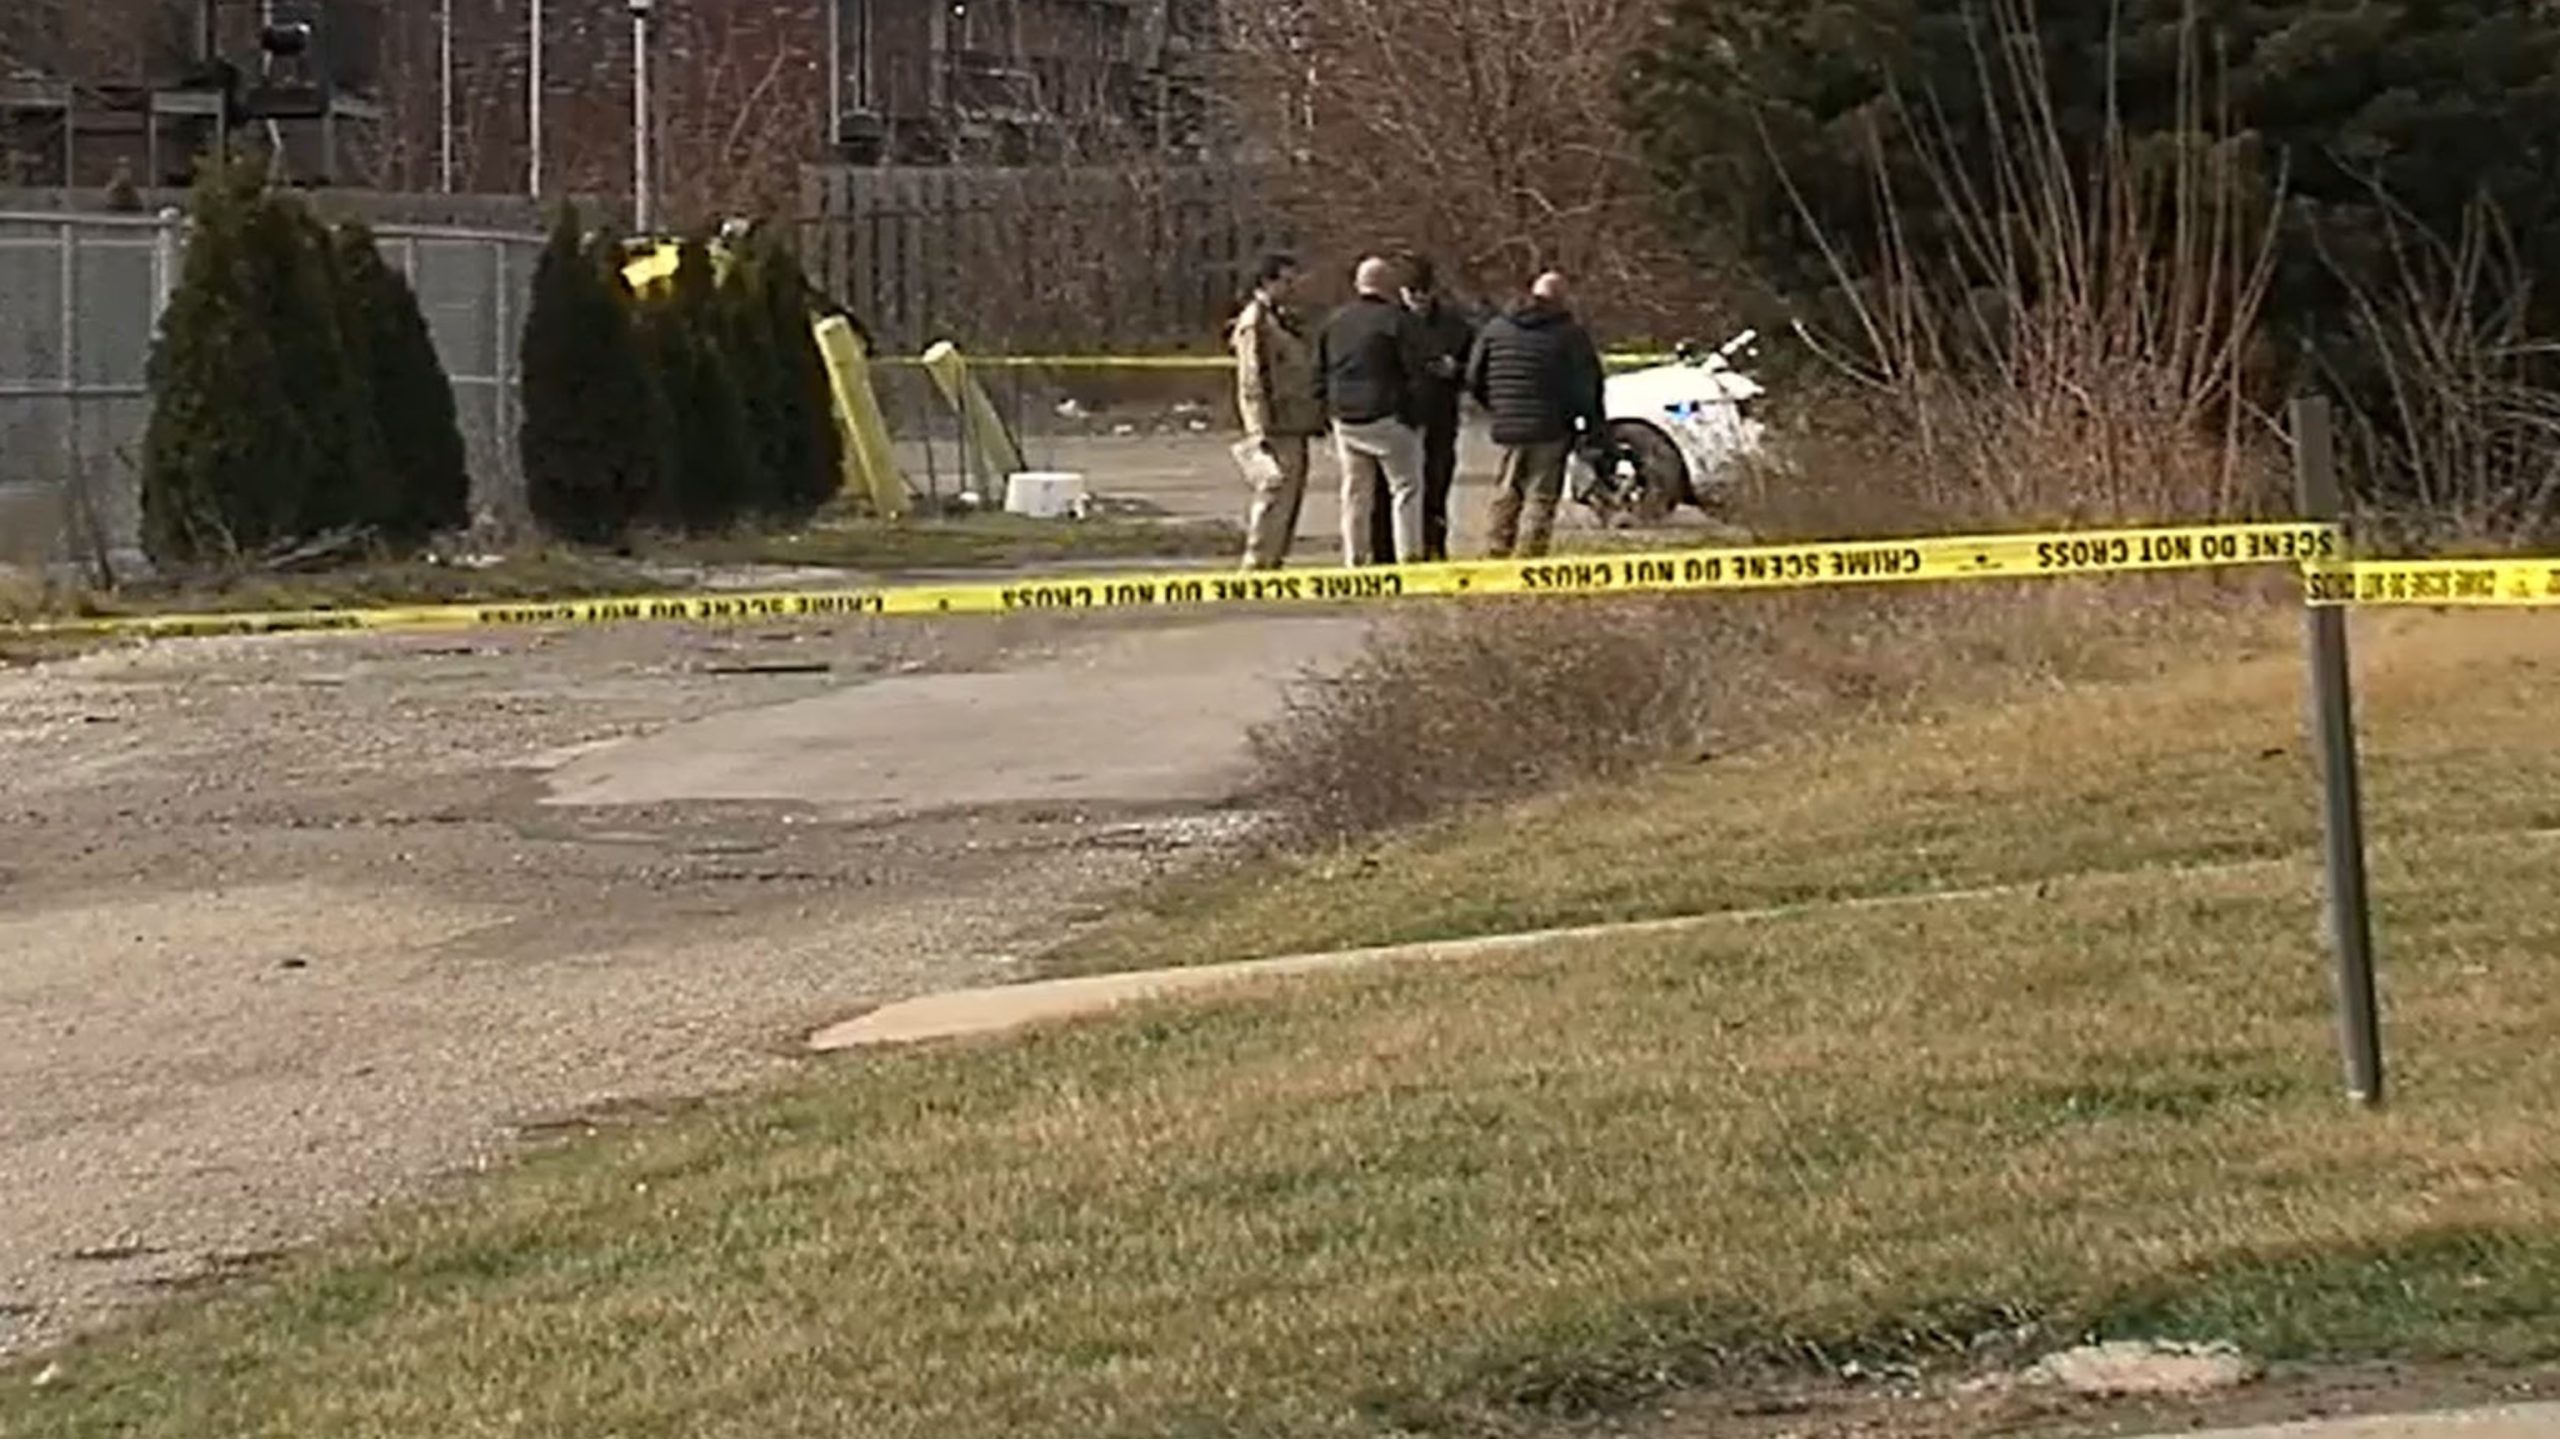 Police discover two women murdered in a similar fashion in close proximity in Indianapolis